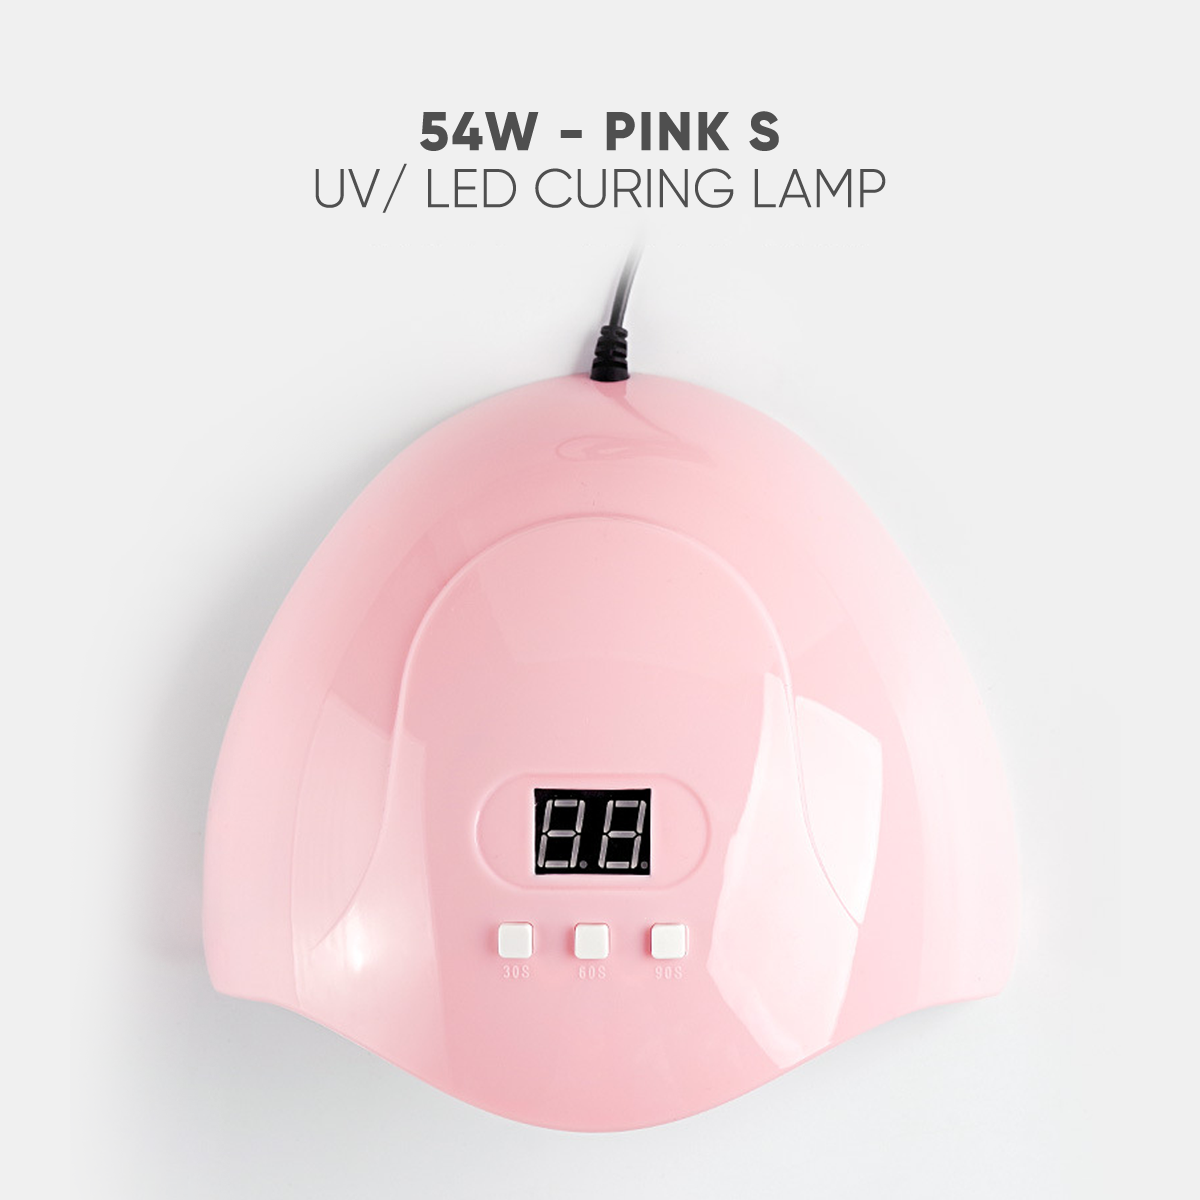 PinkS UV LED 54W Curing Lamp